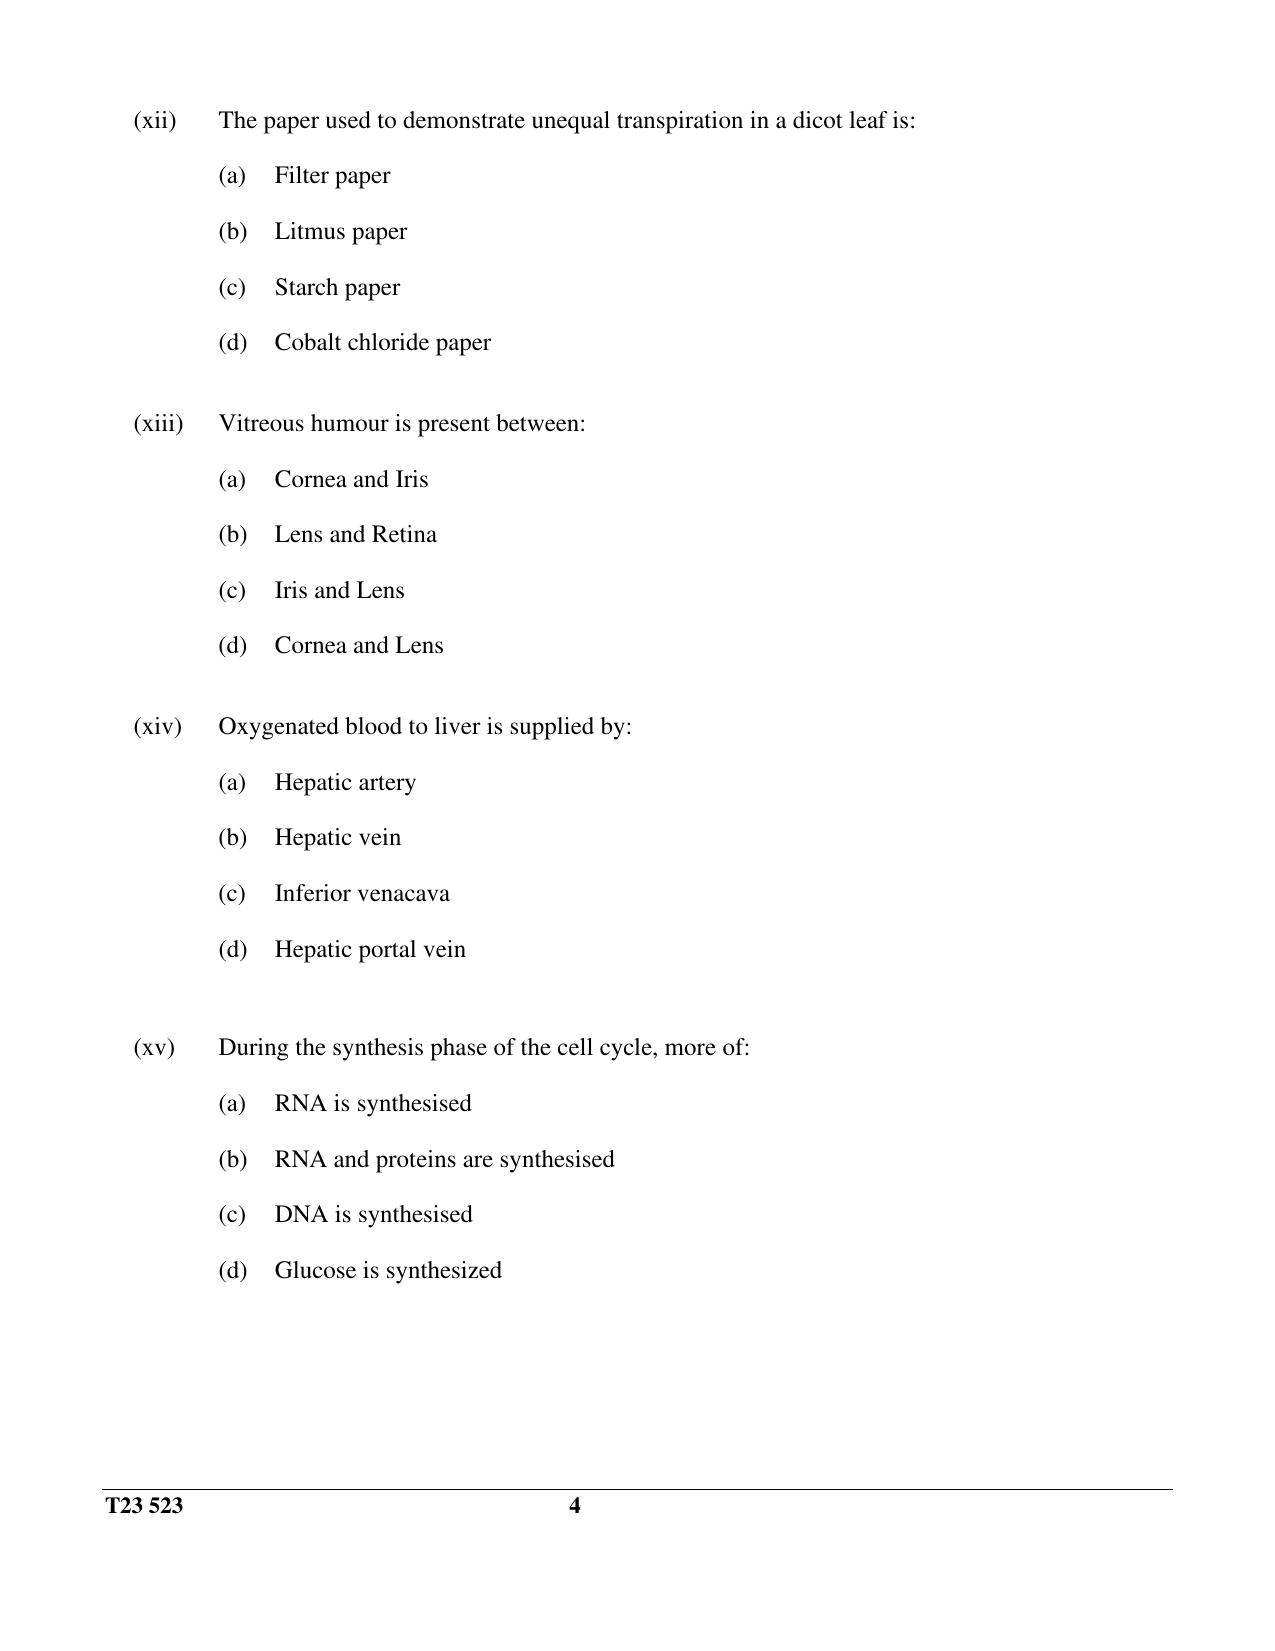 ICSE Class 10 BIOLOGY (SCIENCE PAPER 3) 2023 Question Paper - Page 4